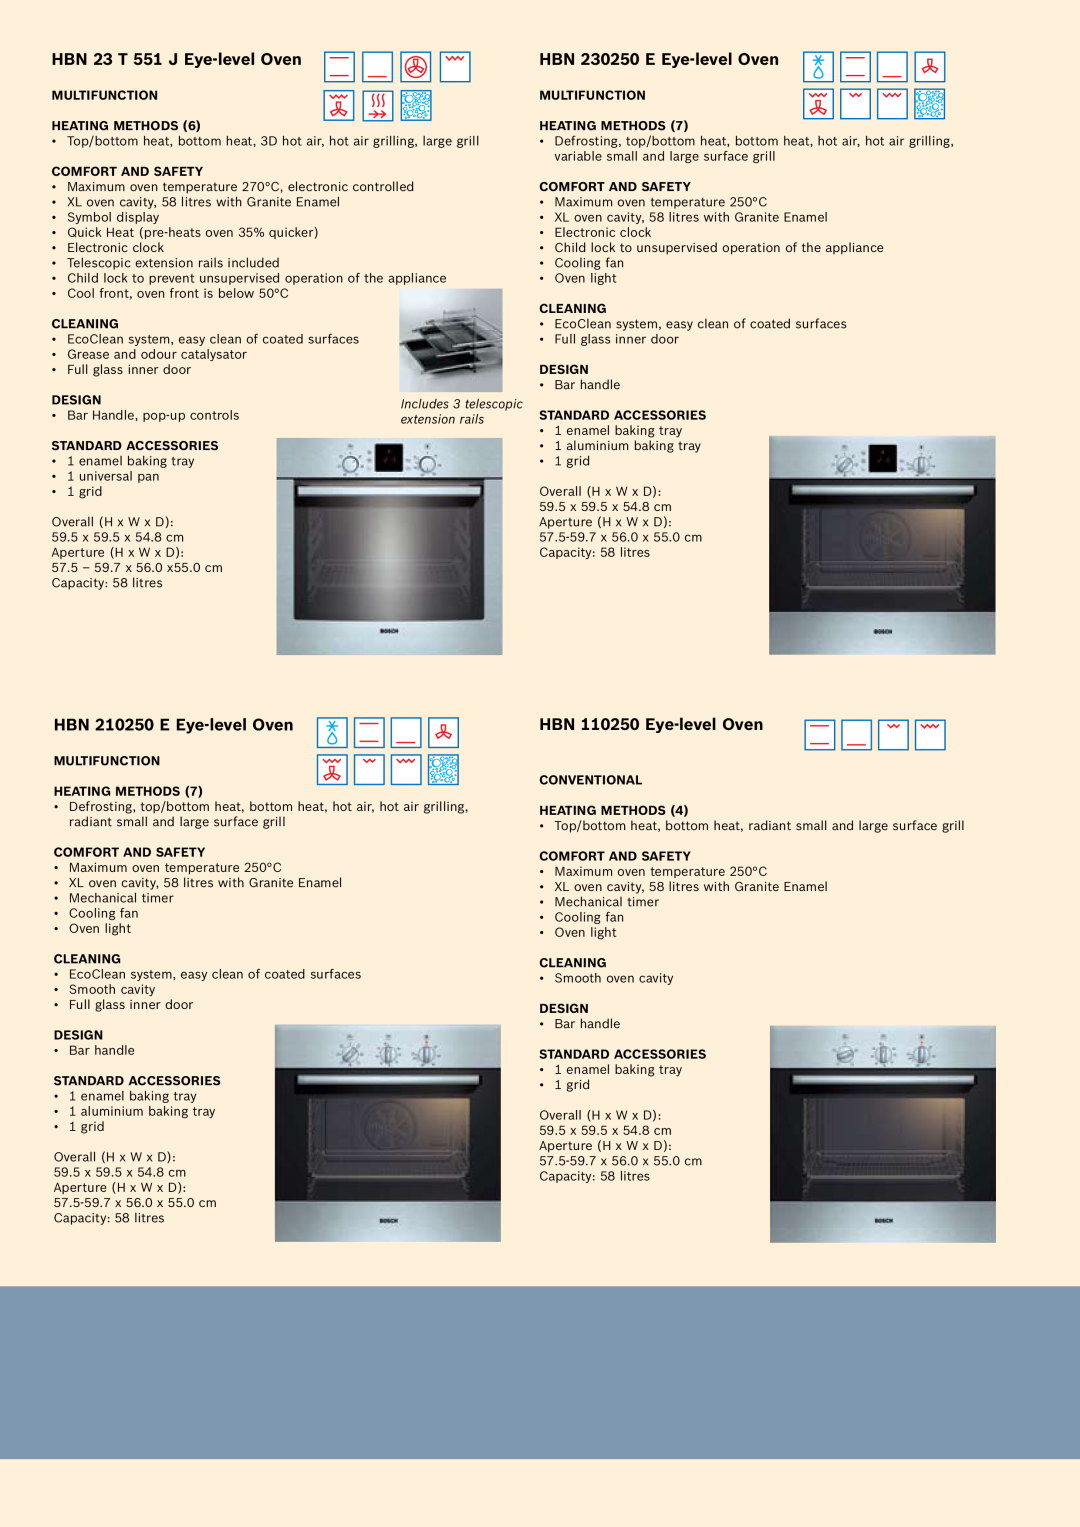 Bosch Appliances Oven Carriage manual HBN 23 T 551 J Eye-levelOven, HBN 230250 E Eye-levelOven, HBN 210250 E Eye-levelOven 